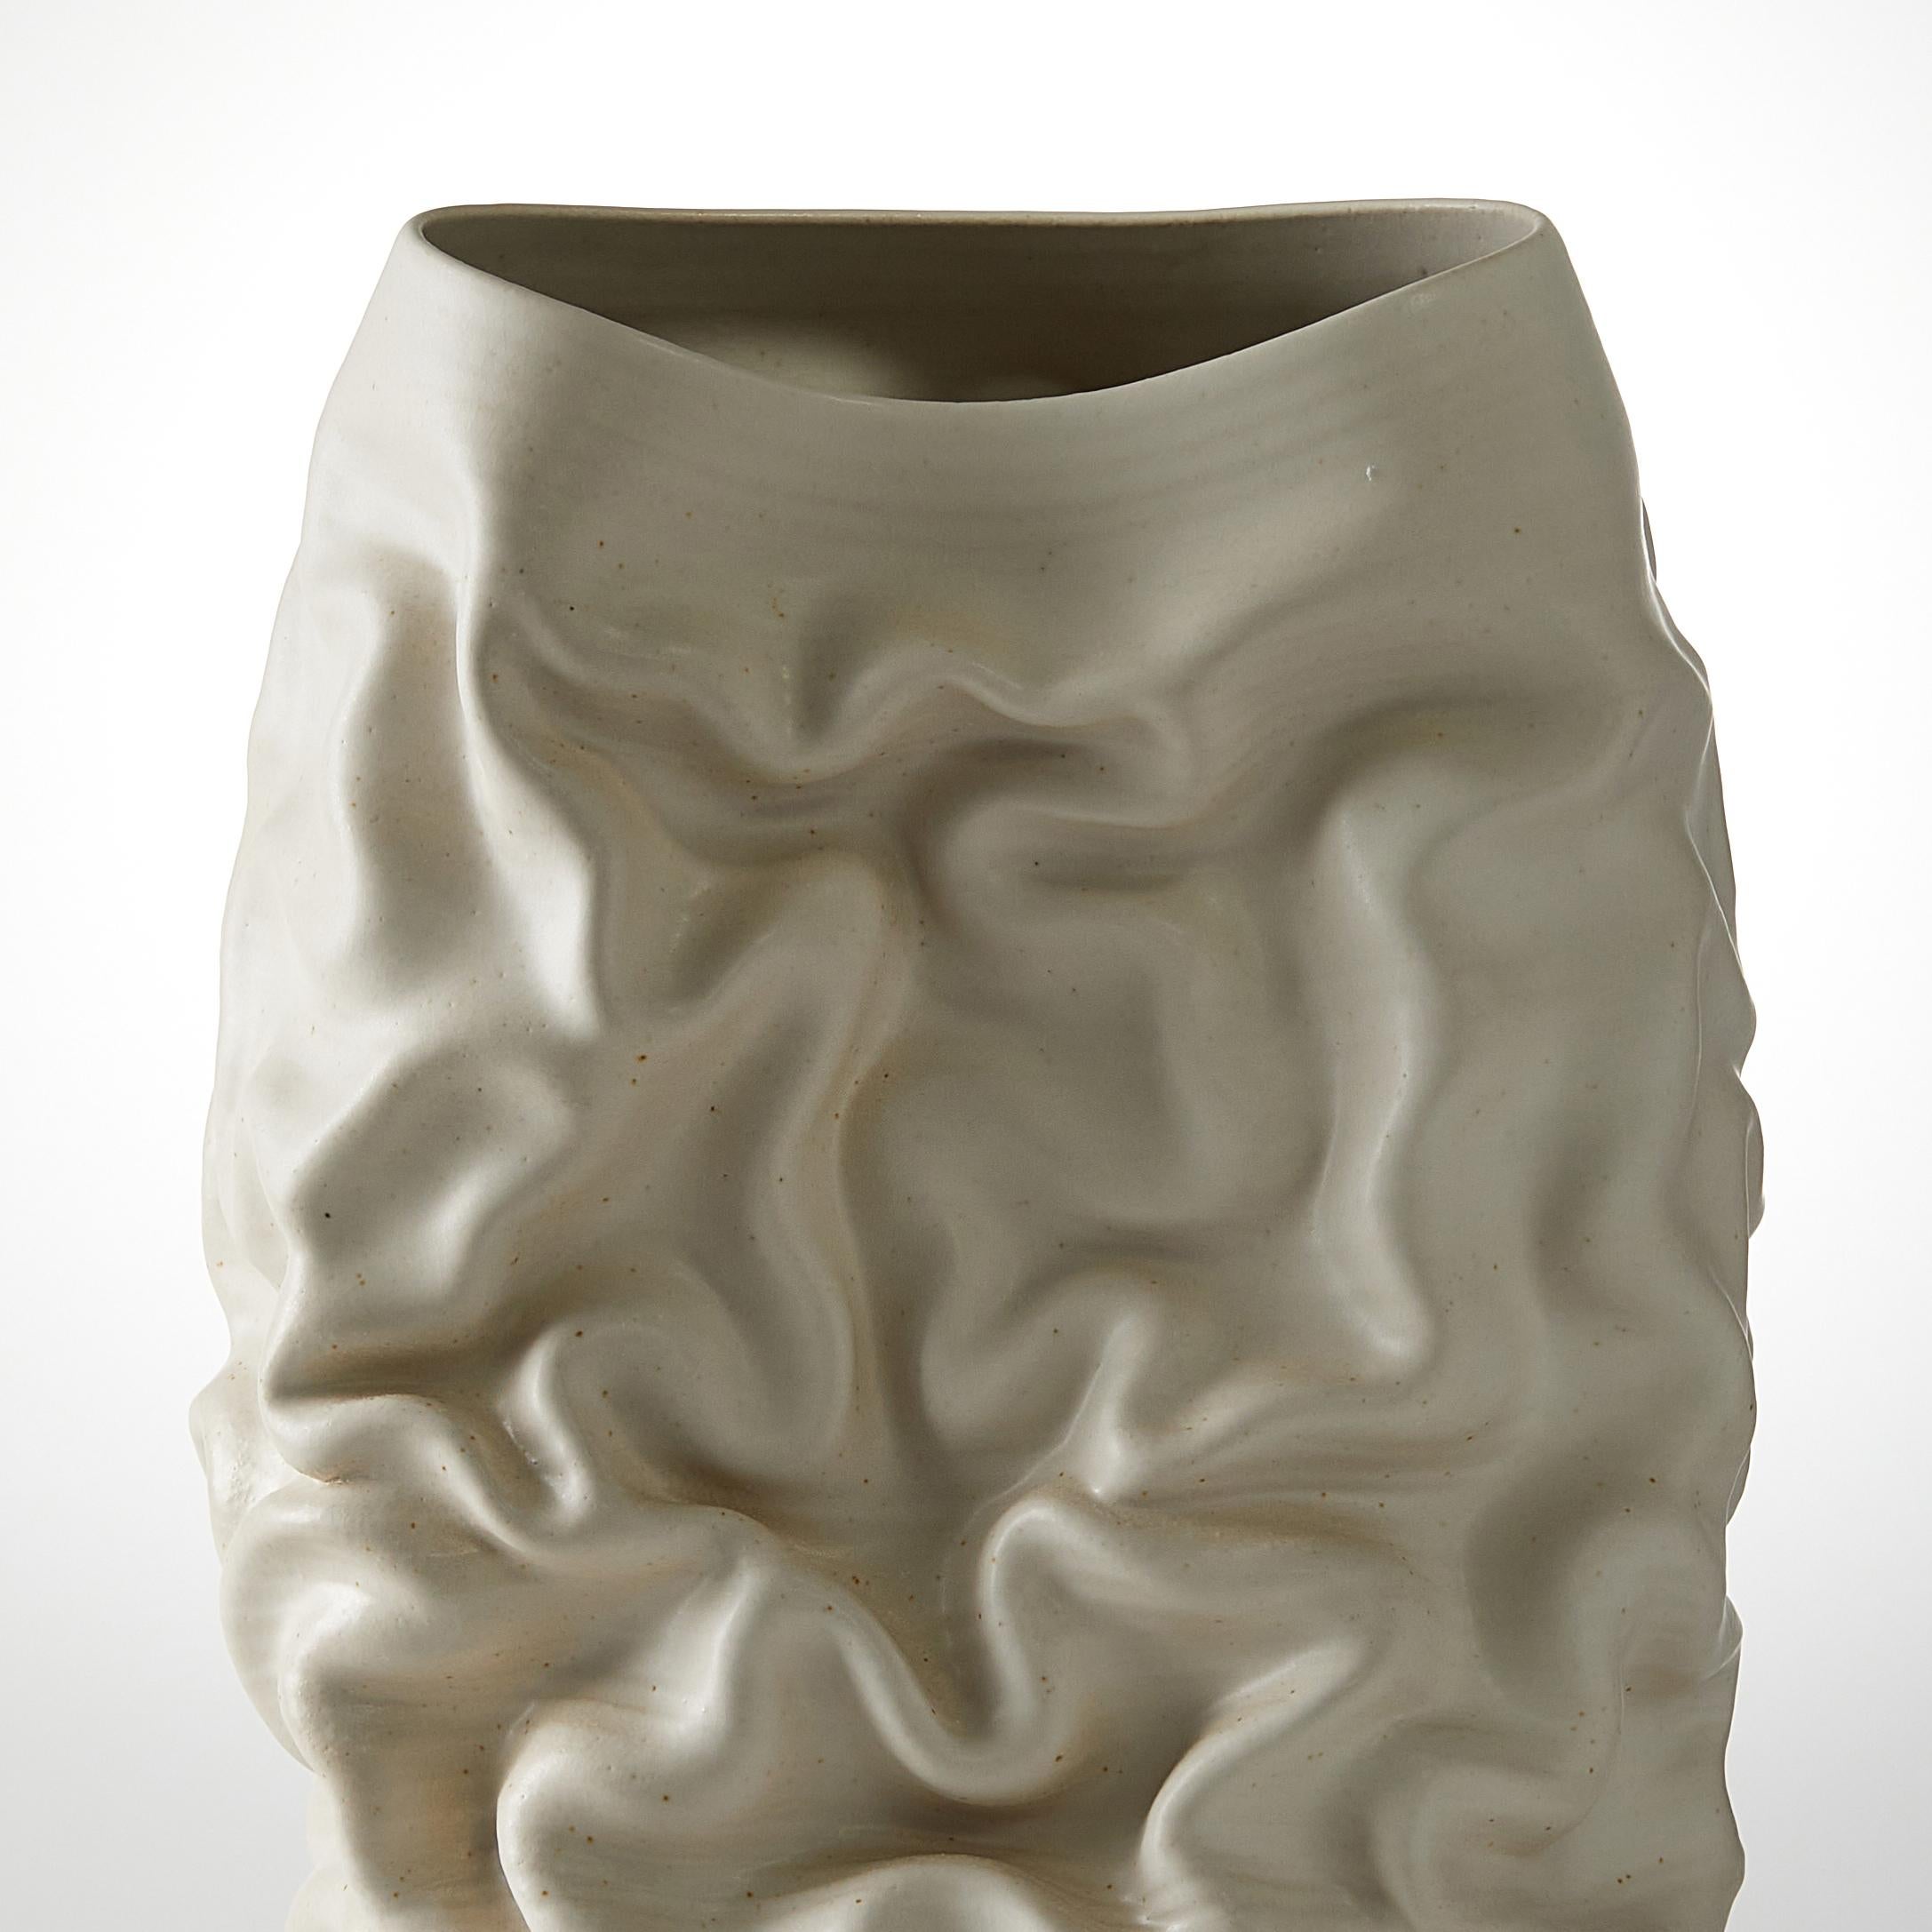 Hand-Crafted Tall White Dehydrated Form No 43, a Ceramic Vessel by Nicholas Arroyave-Portela